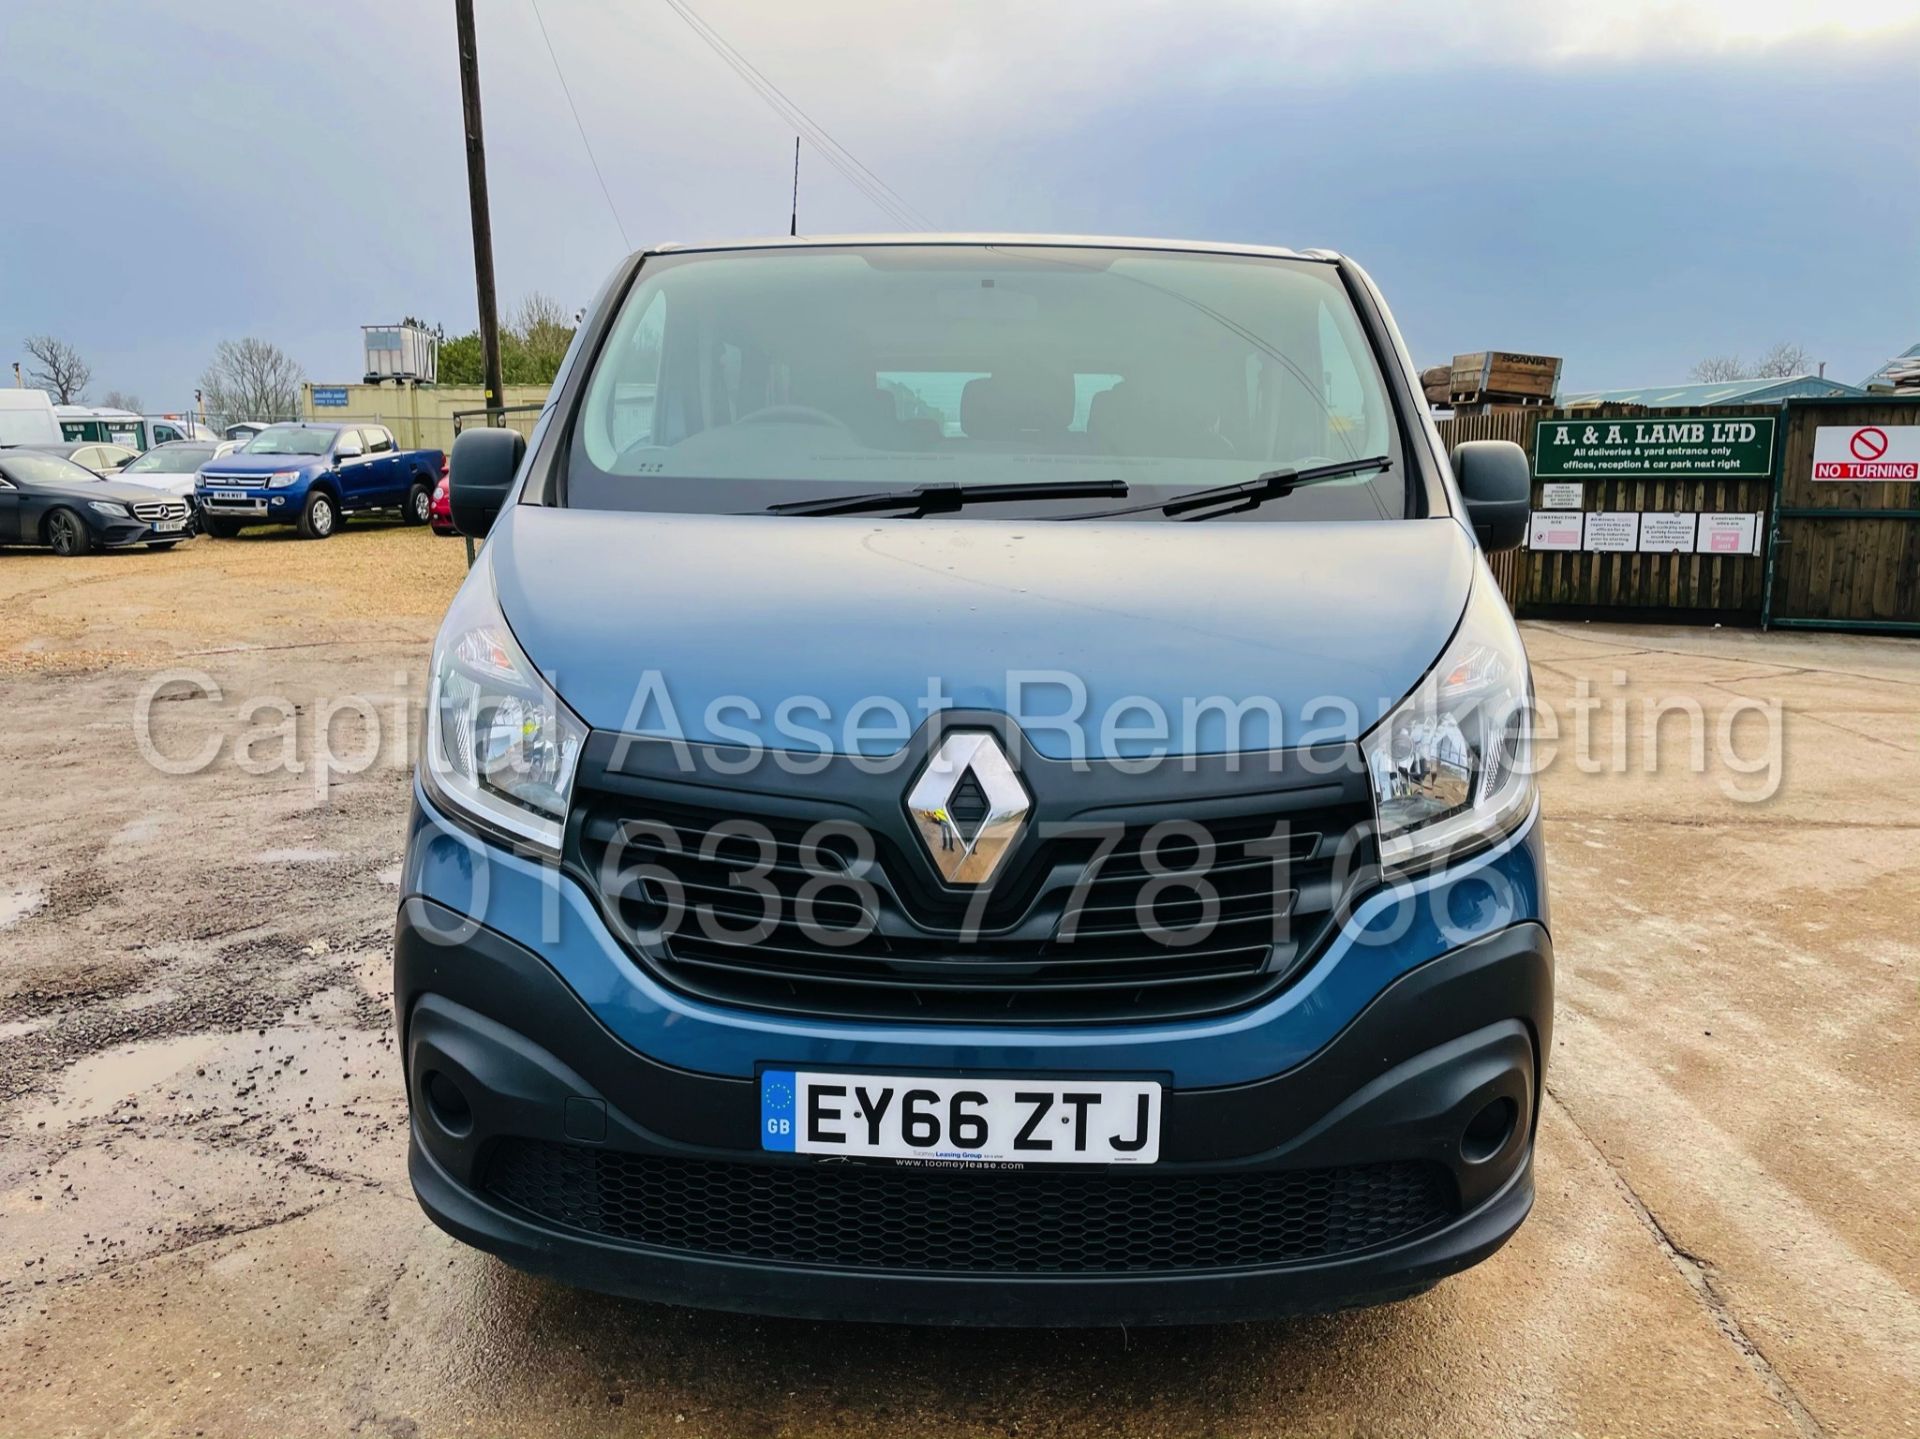 RENAULT TRAFIC *LWB - 9 SEATER MPV / BUS* (2017 - EURO 6) '1.6 DCI - 6 SPEED' *AIR CON* (NO VAT) - Image 14 of 47